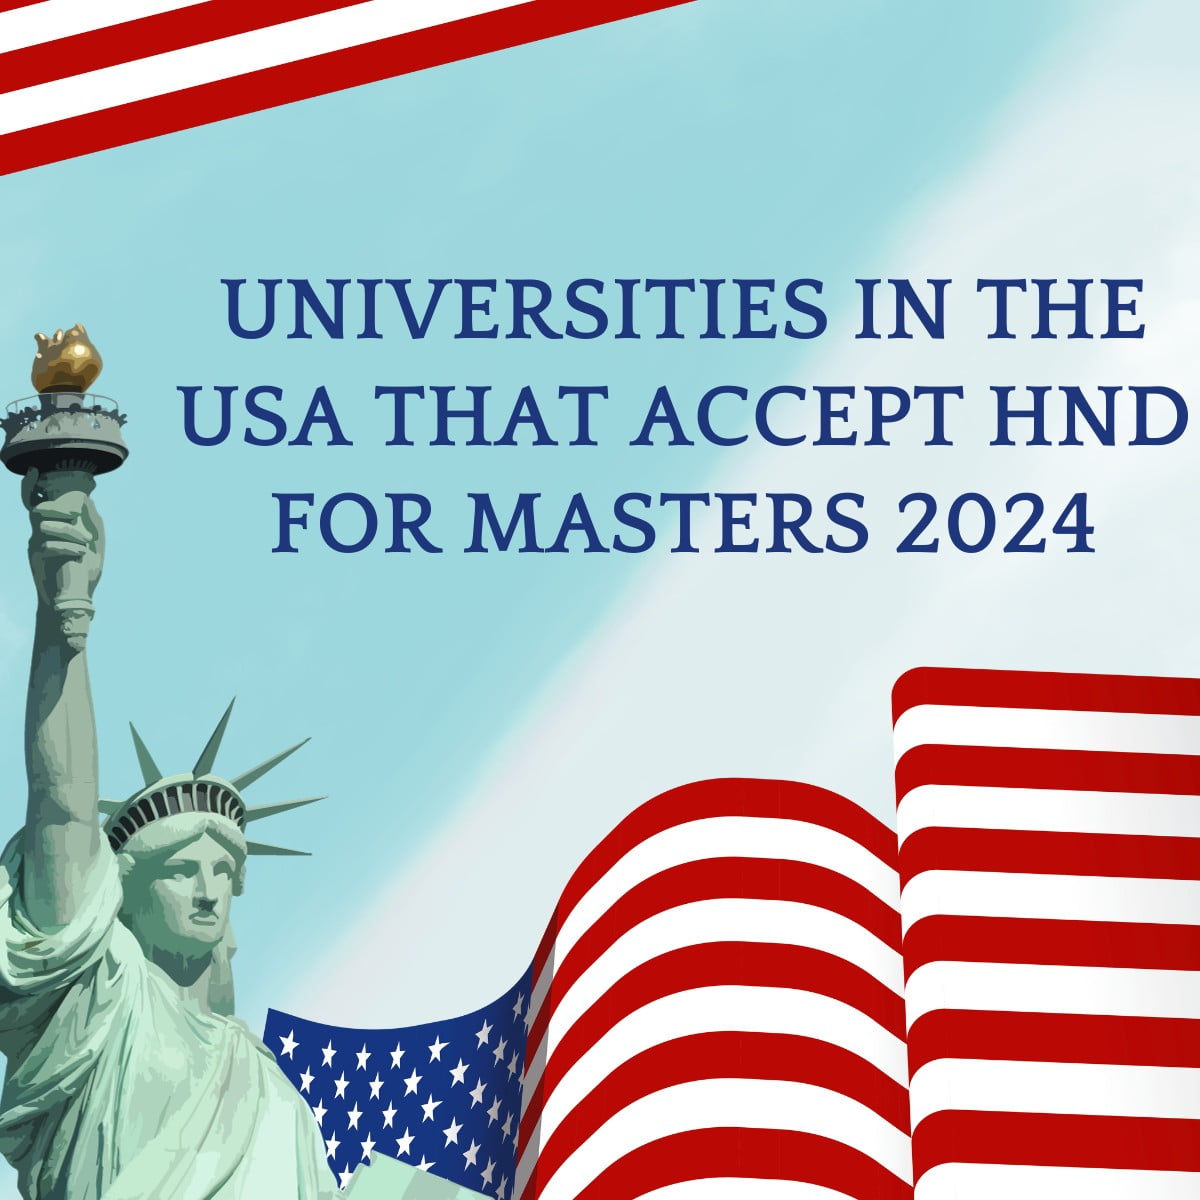 Universities in the USA that accept HND for Masters 2024